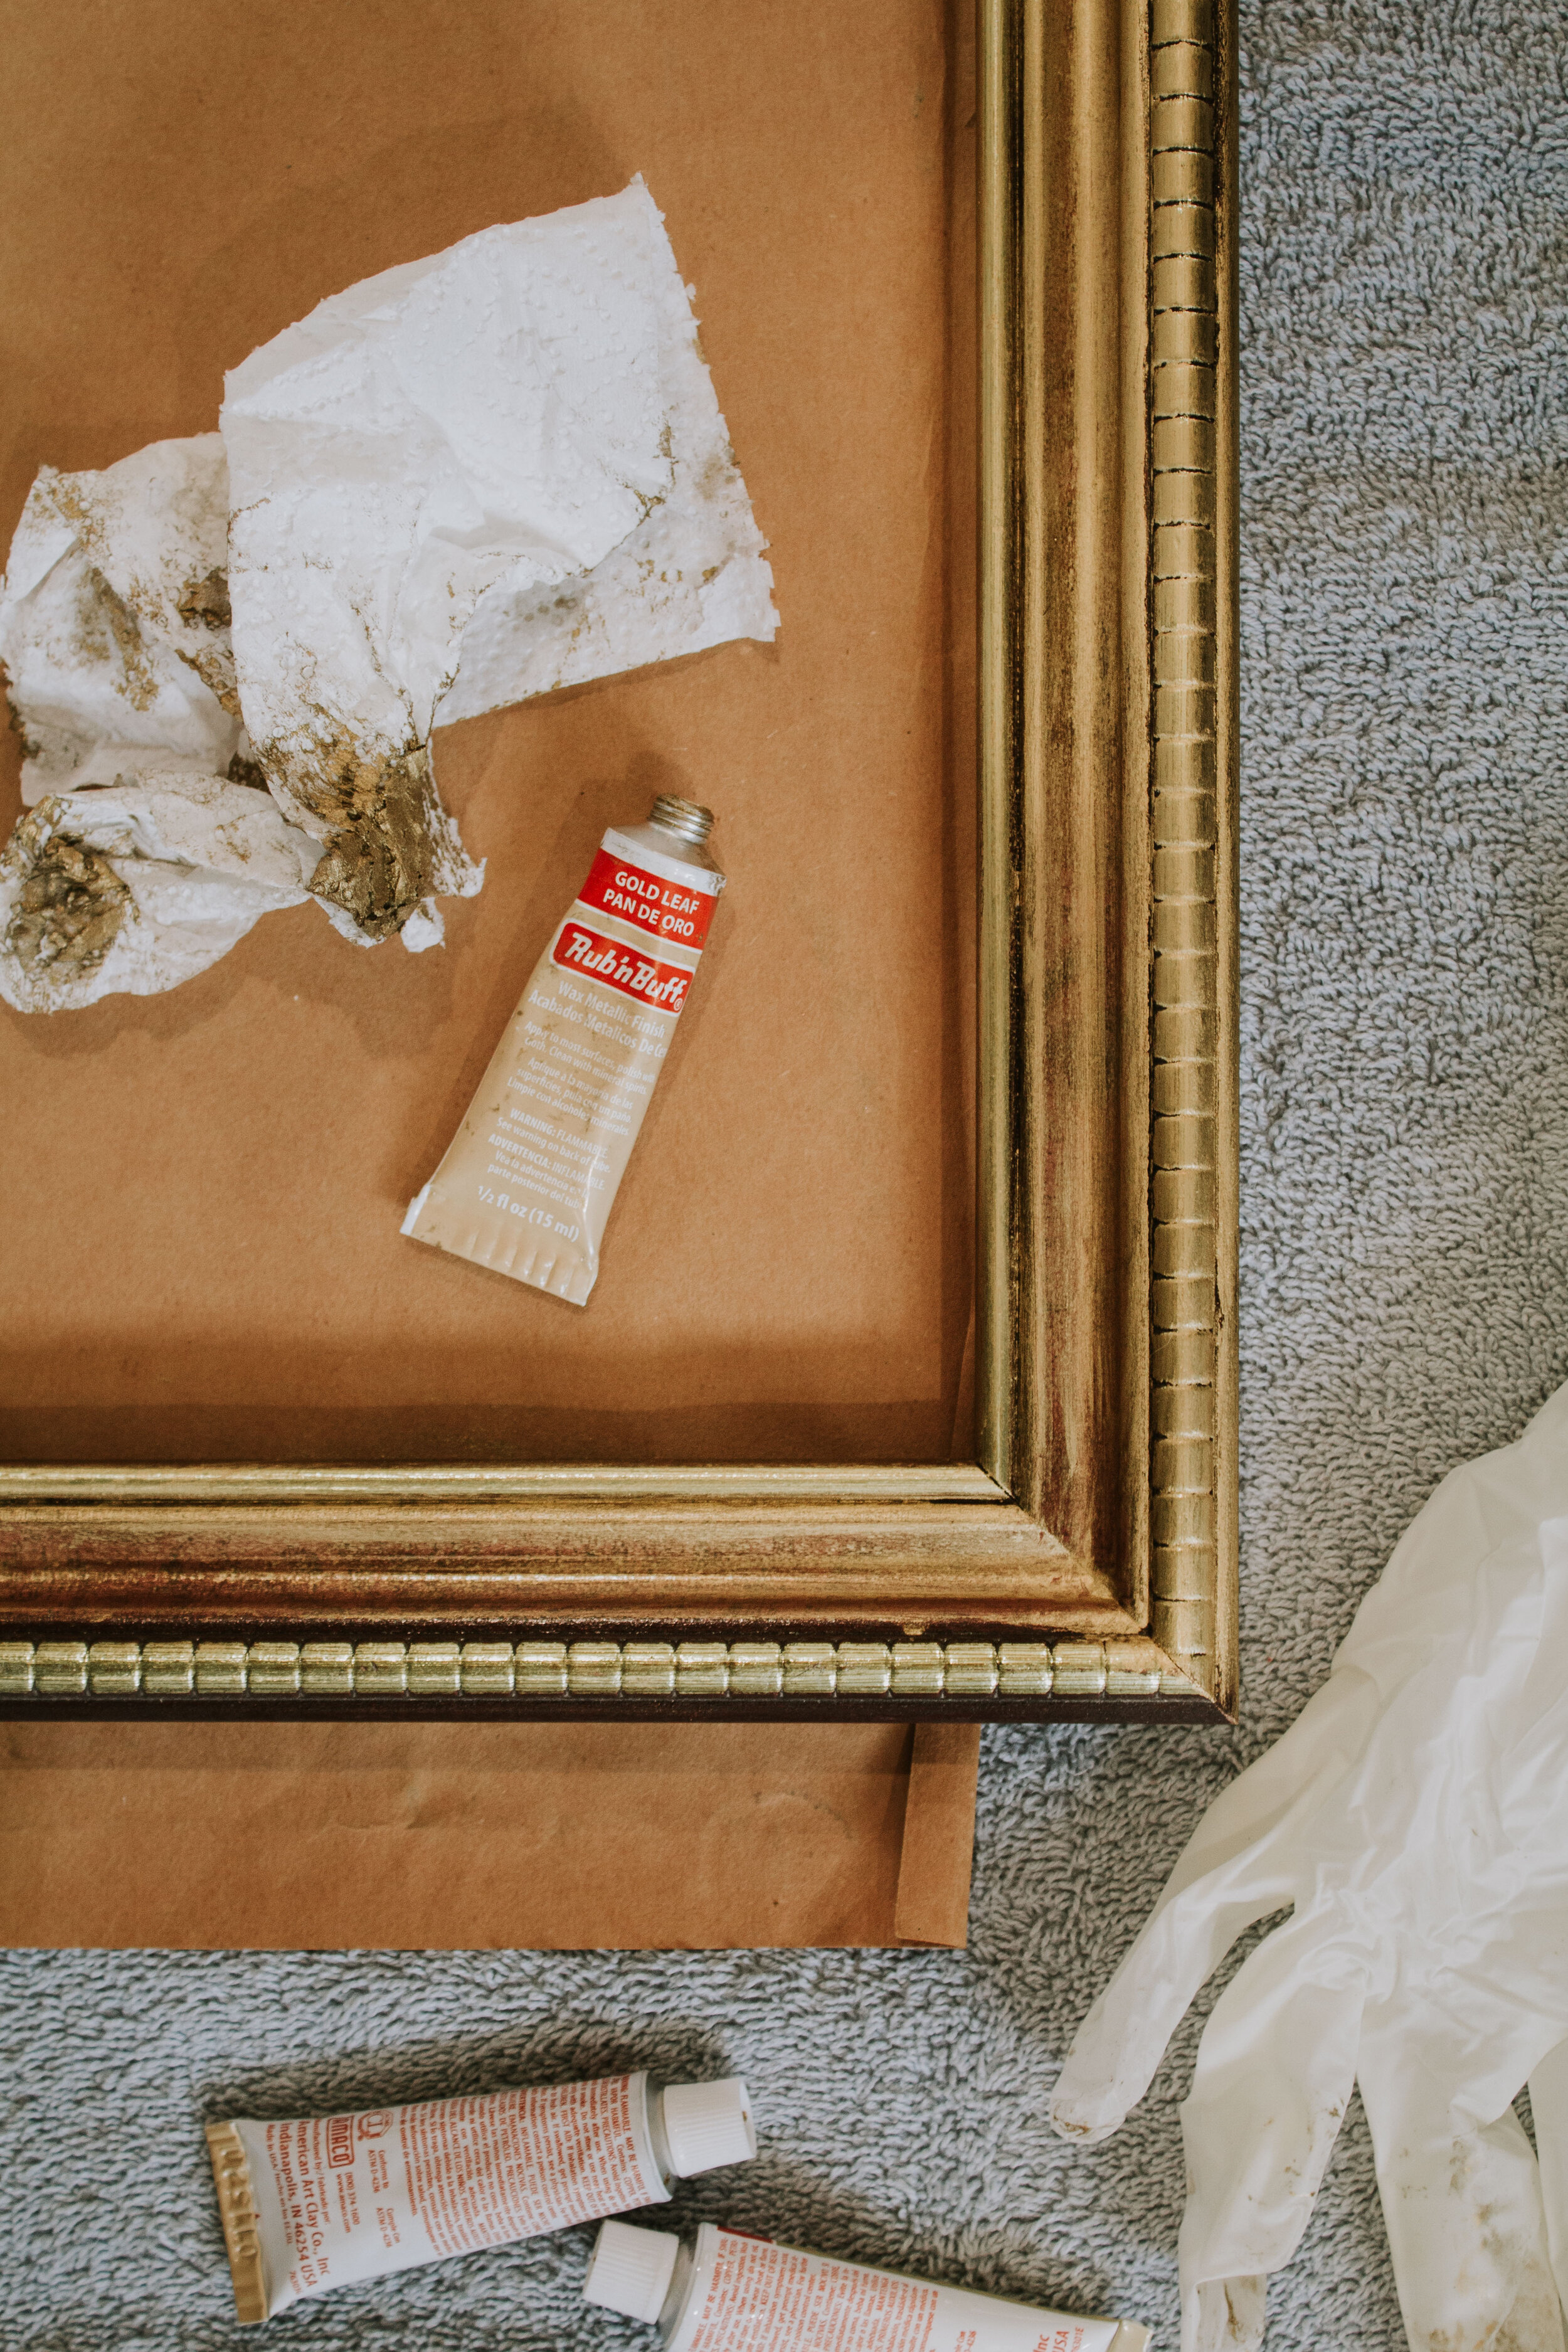 Diy Frame Makeover A 45 Minute Project, How To Make Picture Frames Look Vintage